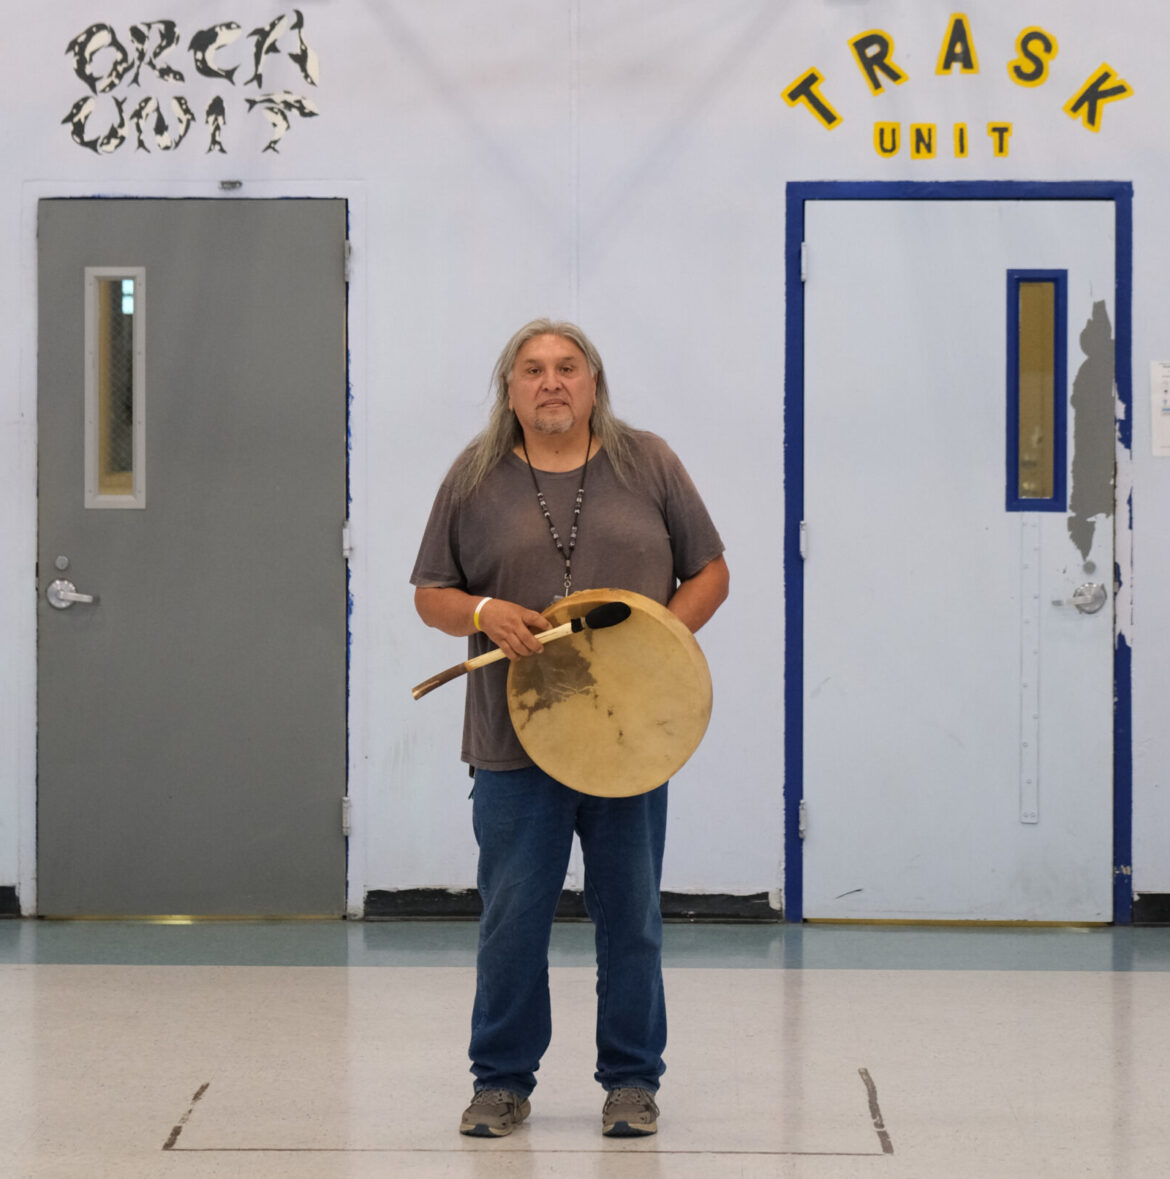 Native American rituals: Native American elder man with long gray hair in jeans and gray t-shirt stands under indoor basketball court hoop holding drum